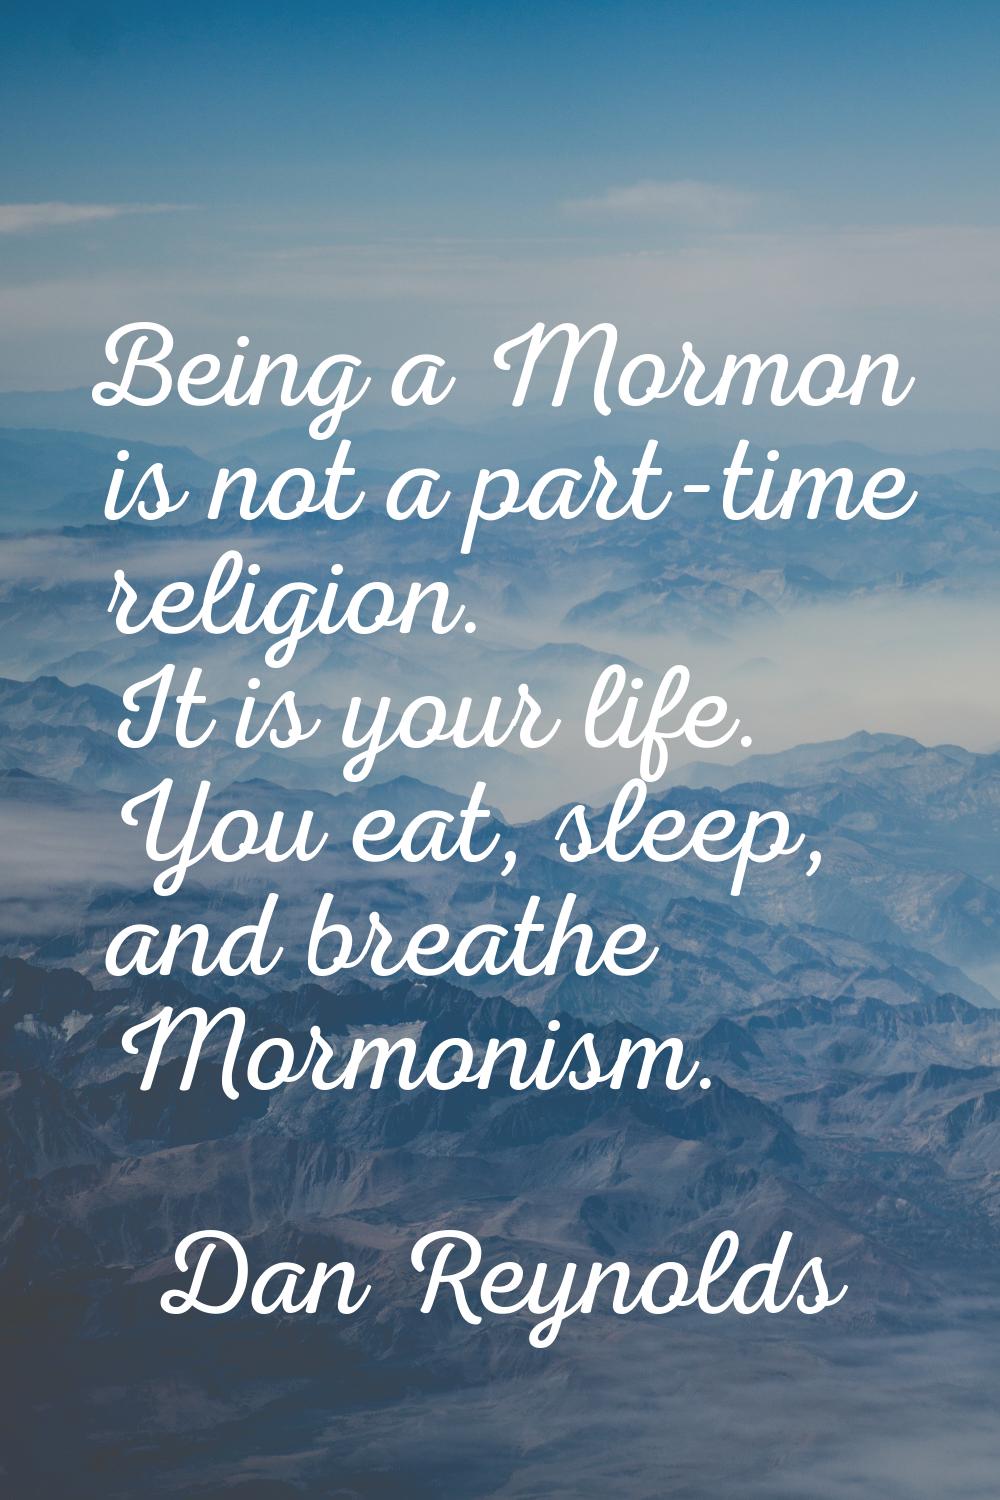 Being a Mormon is not a part-time religion. It is your life. You eat, sleep, and breathe Mormonism.